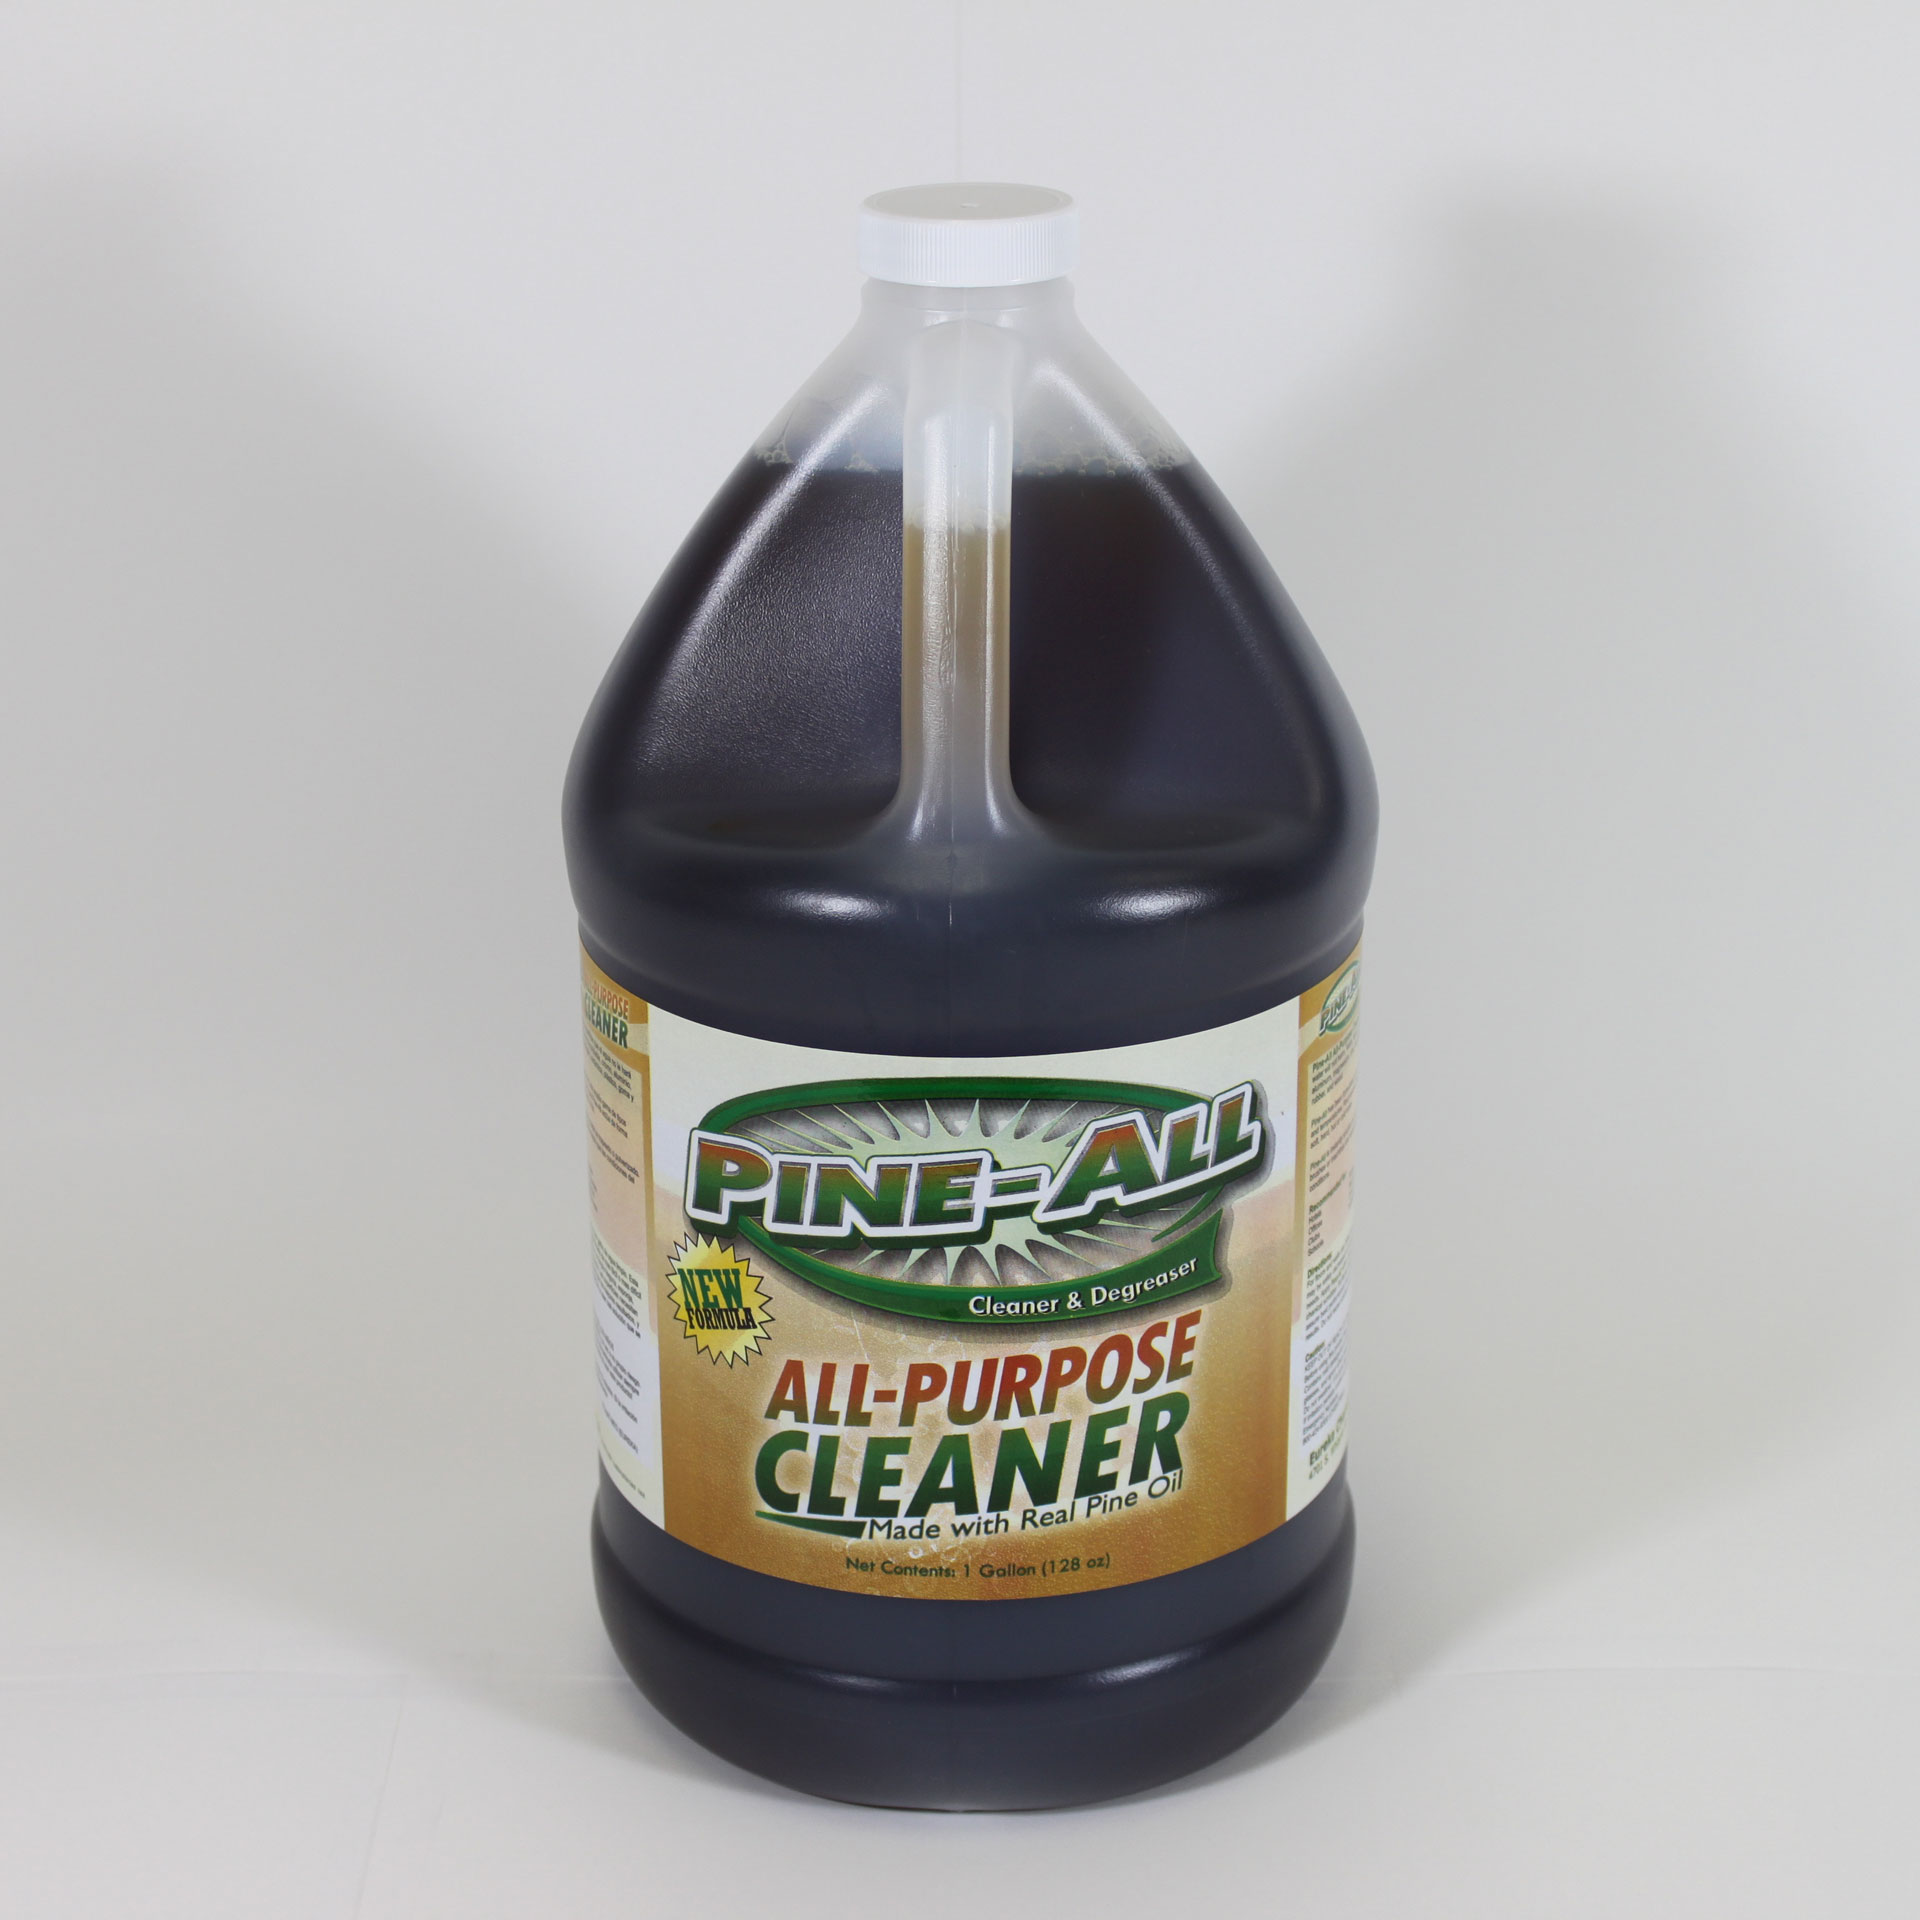 Bottle of Pine-All all-purpose cleaner